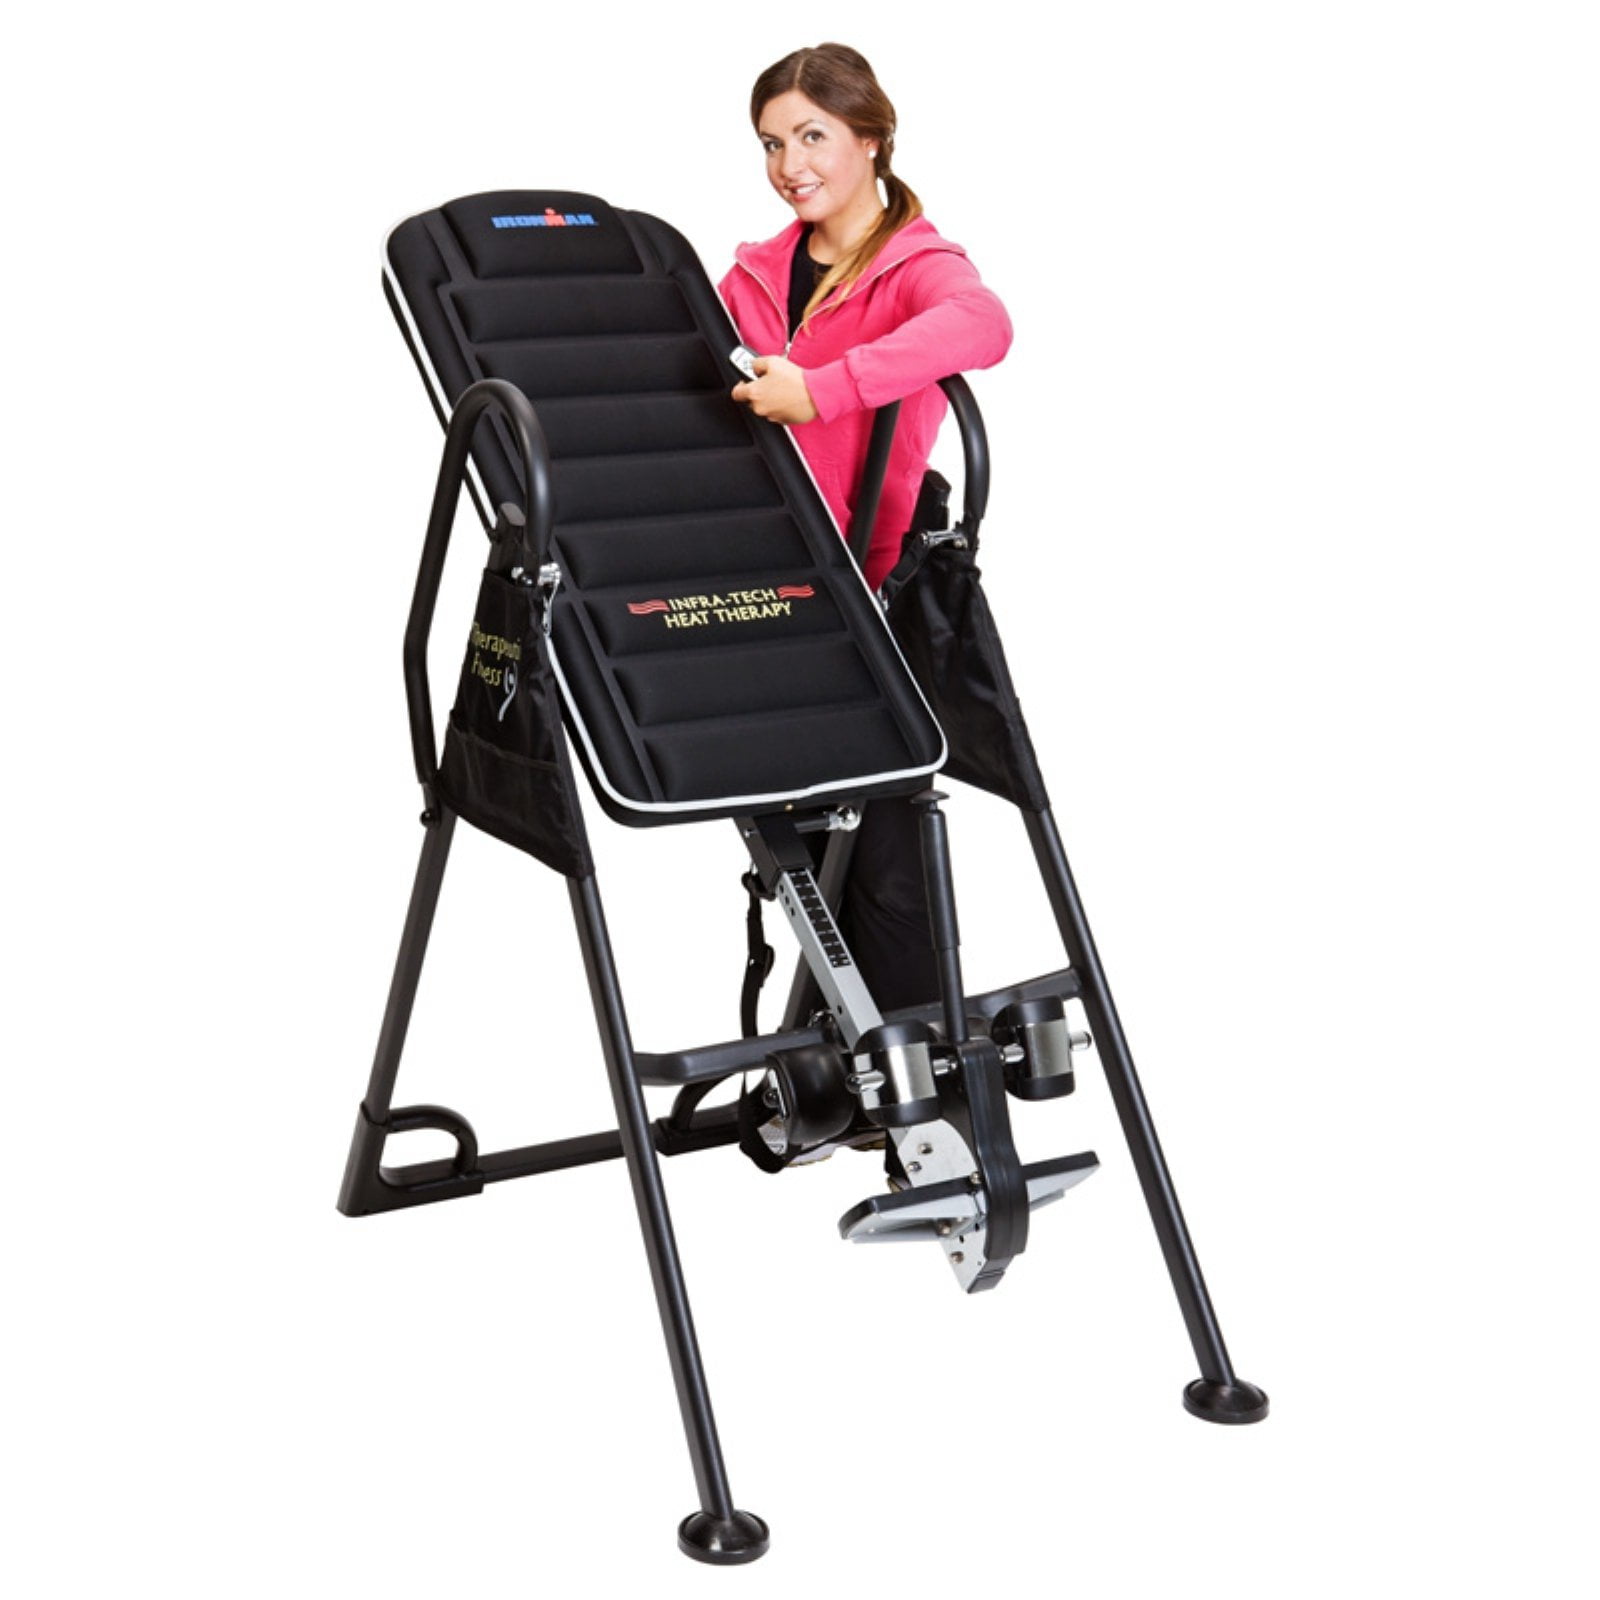 Ironman FIR1000 Infrared Therapy Inversion Table - Walmart.com.